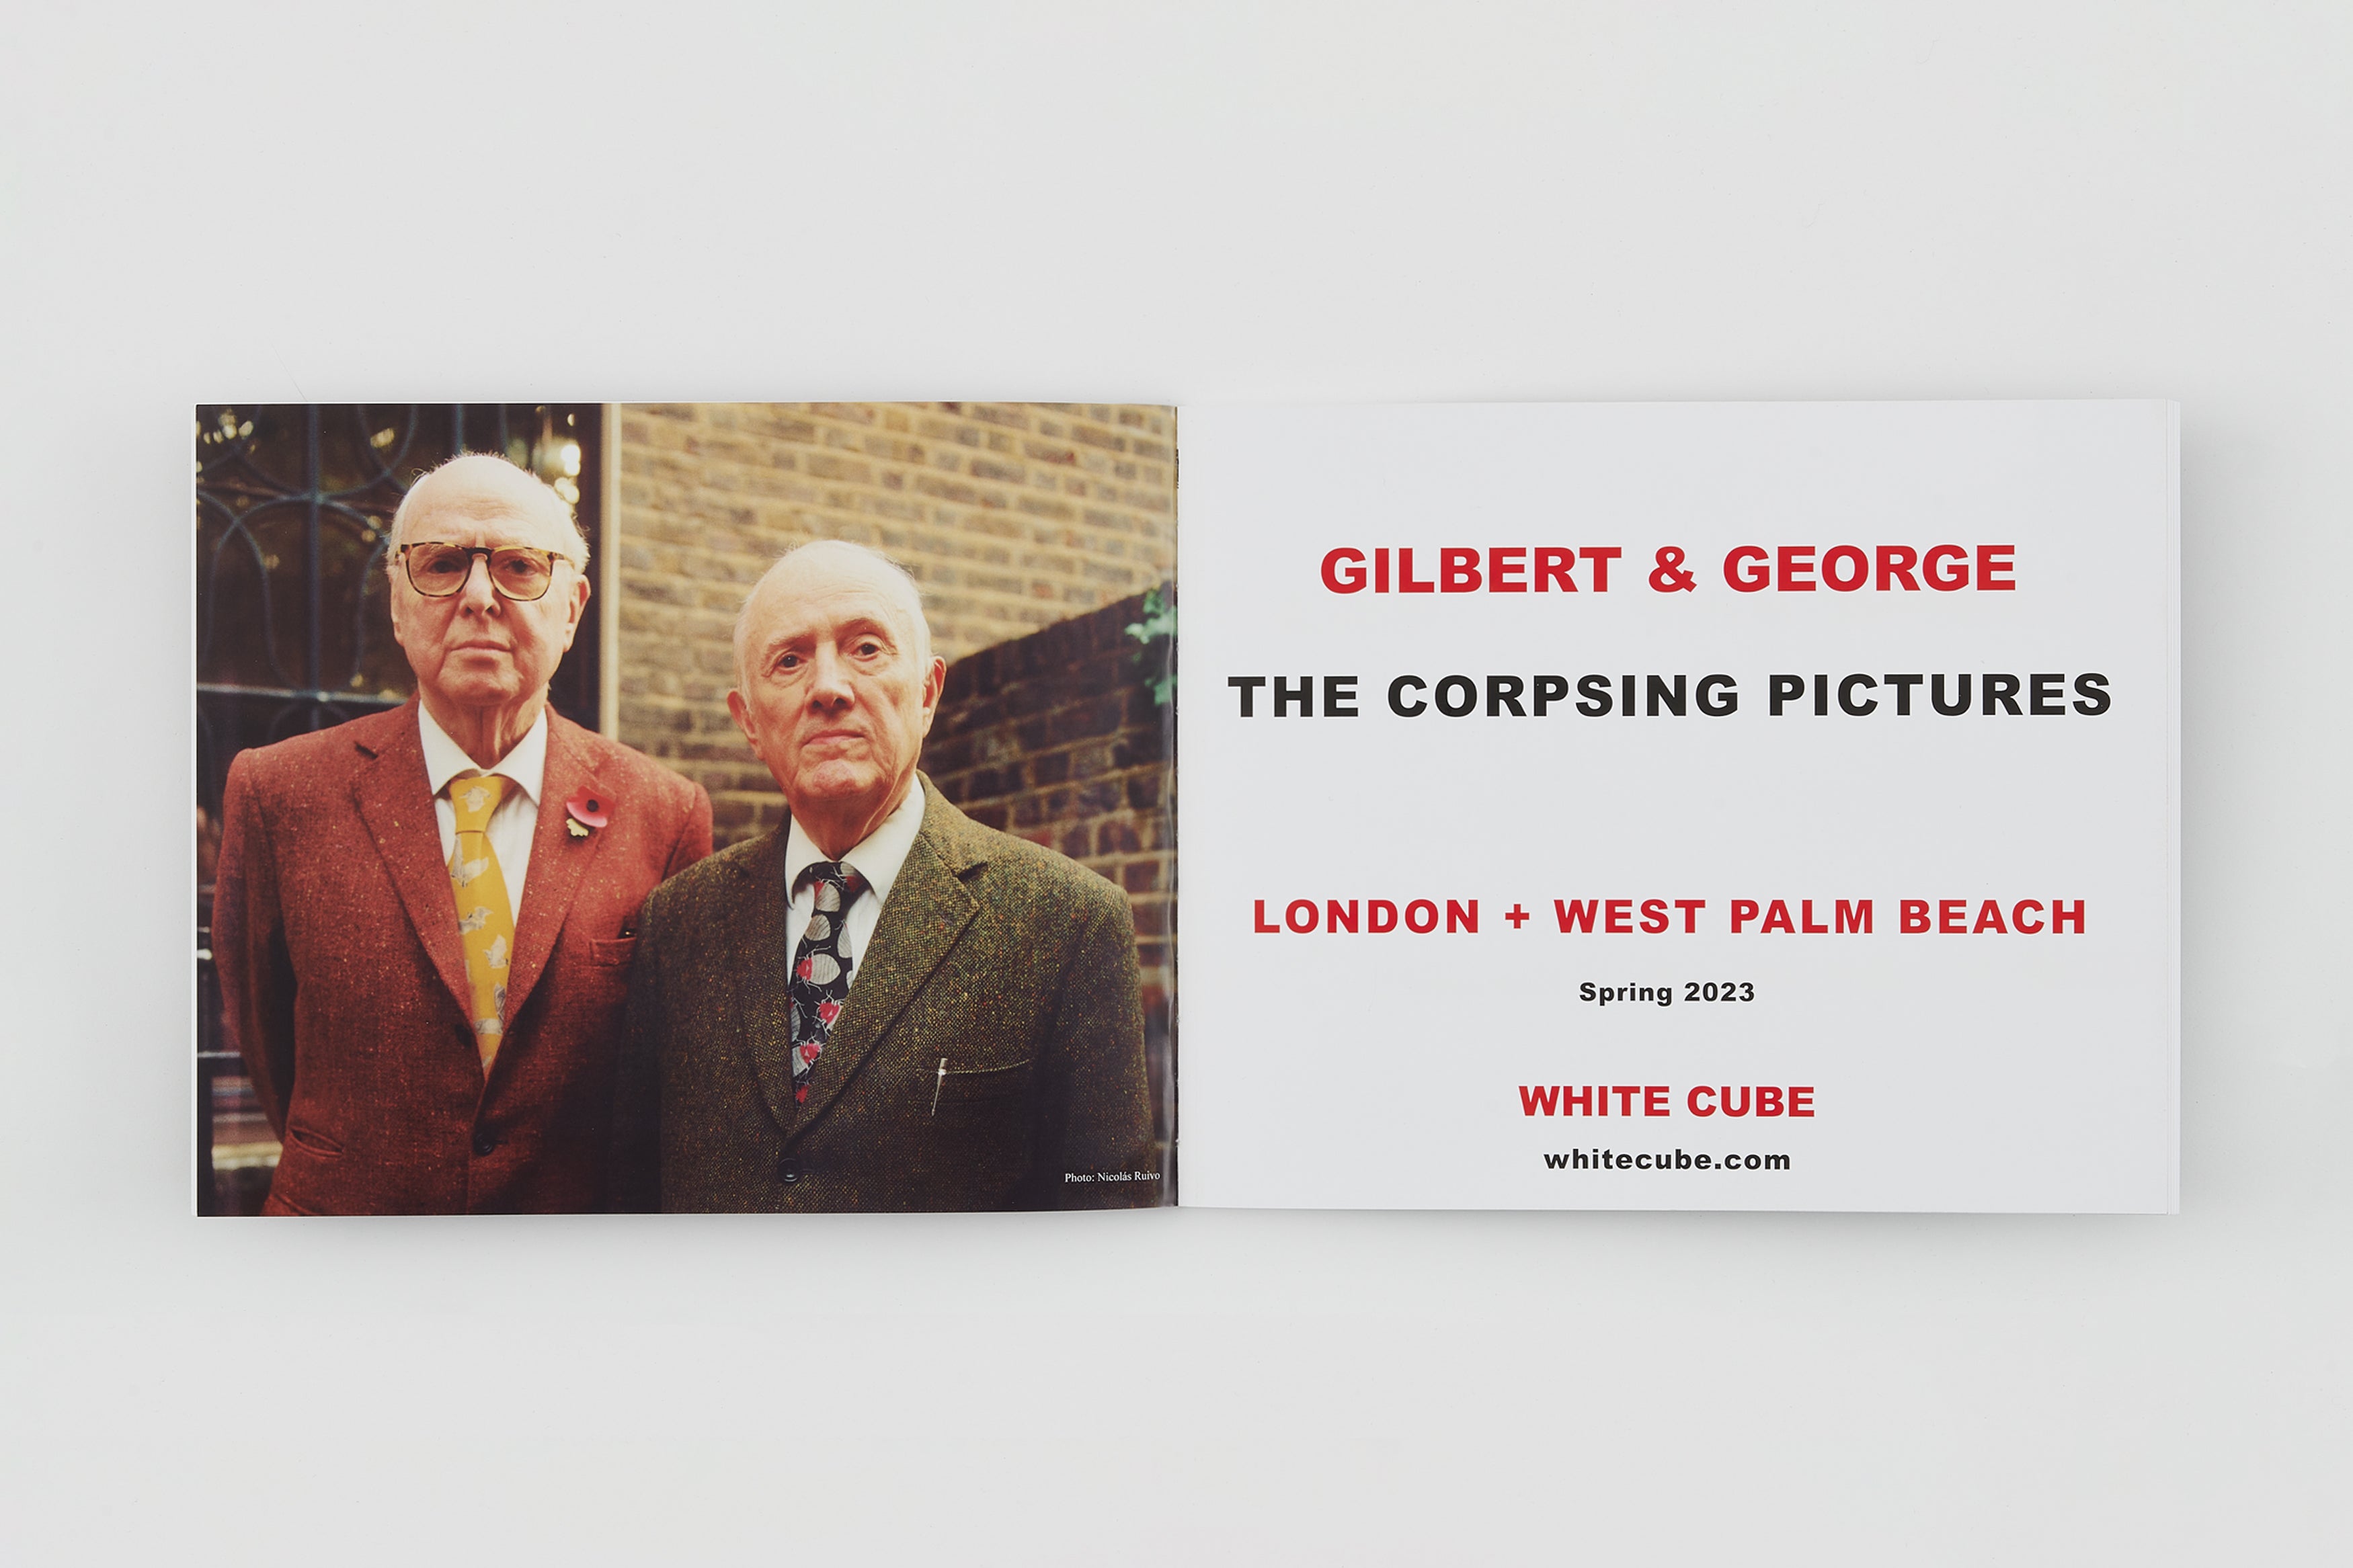 Gilbert & George ‘THE CORPSING PICTURES’ (2023)